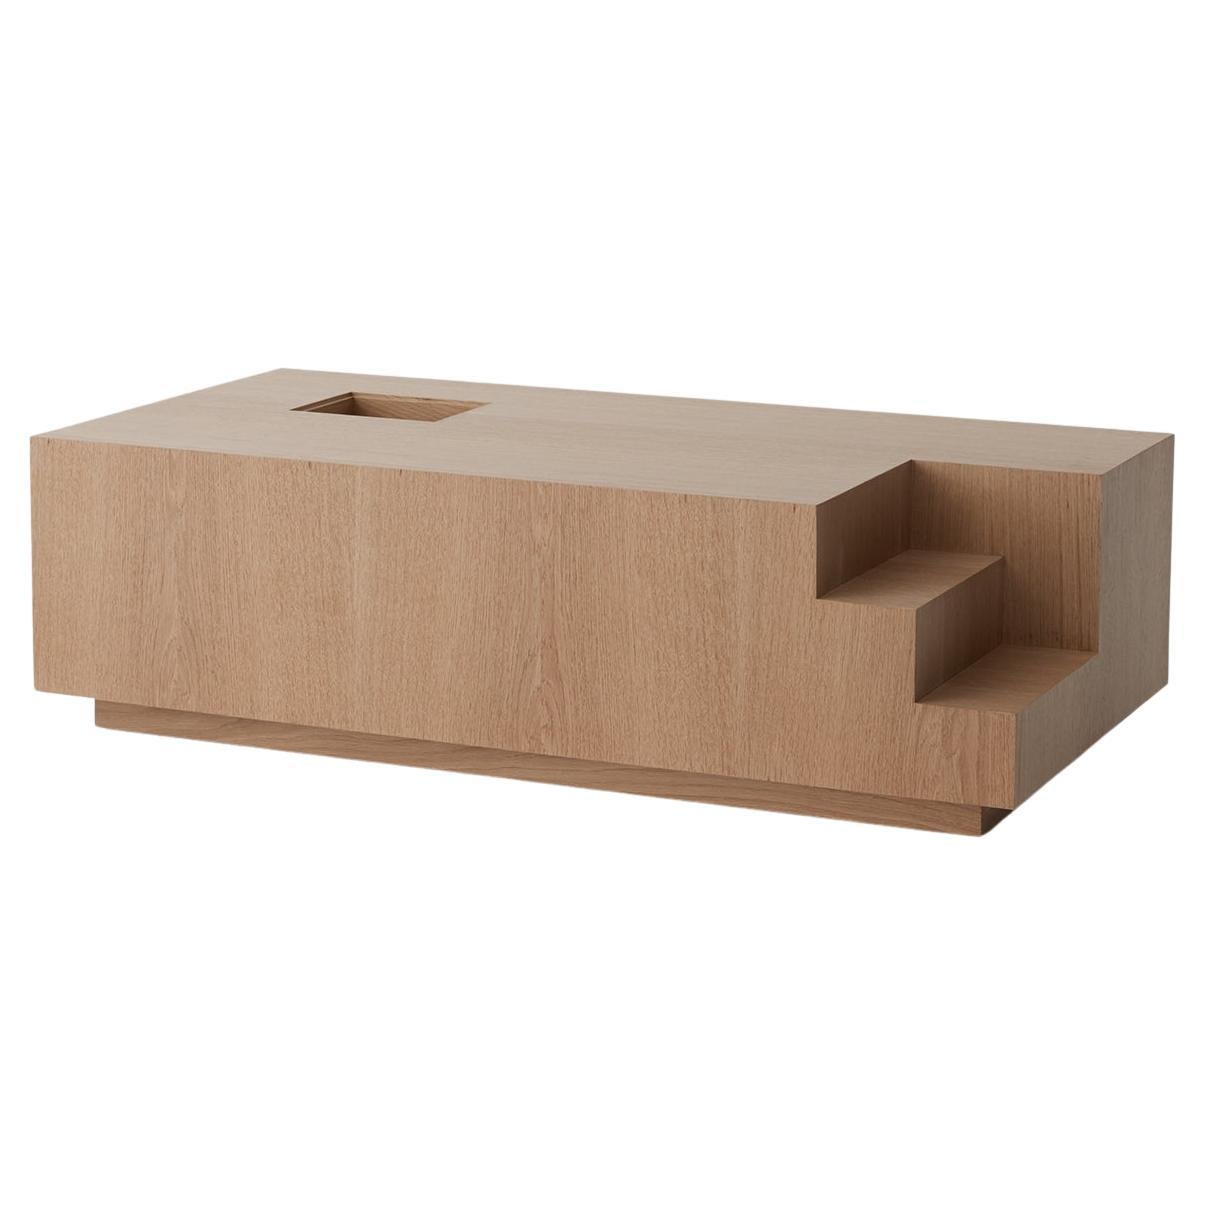 M-Coffee Table by Daniel Boddam, Natural Oak For Sale